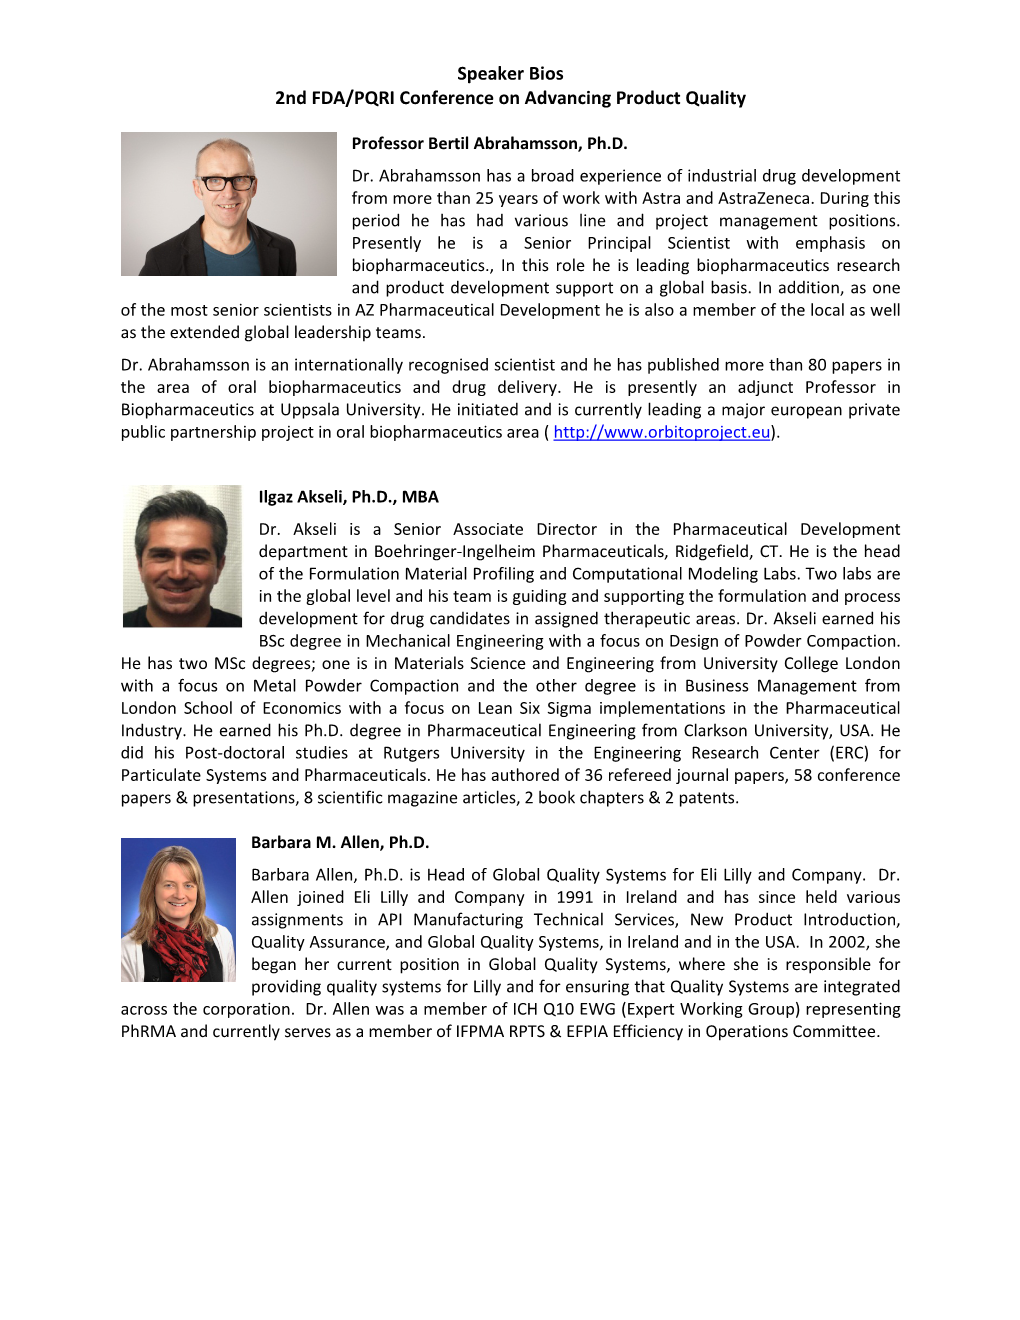 Speaker Bios 2Nd FDA/PQRI Conference on Advancing Product Quality